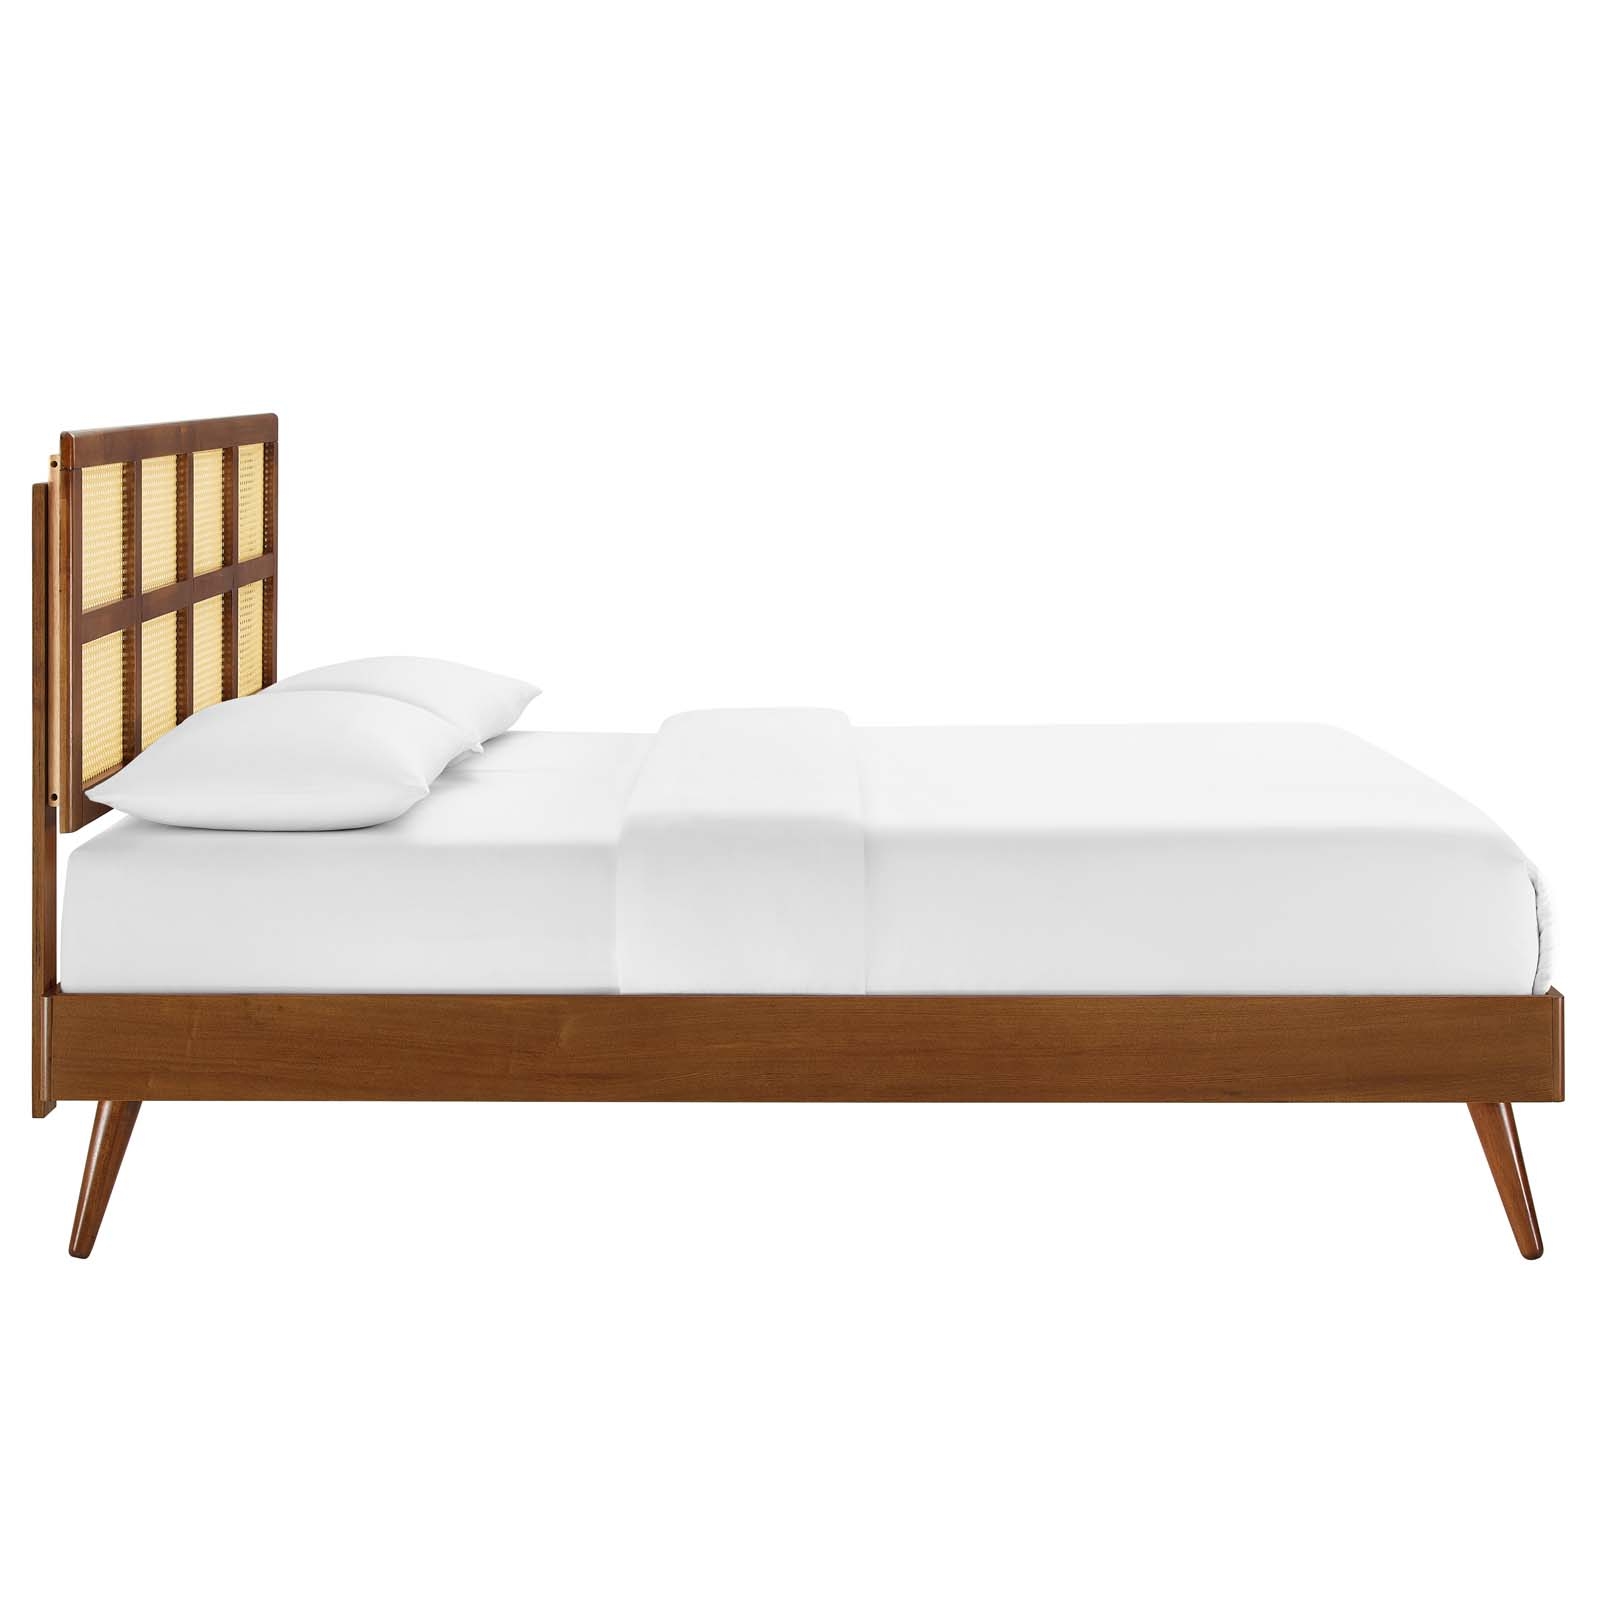 Sidney Cane And Wood King Platform Bed With Splayed Legs, Walnut